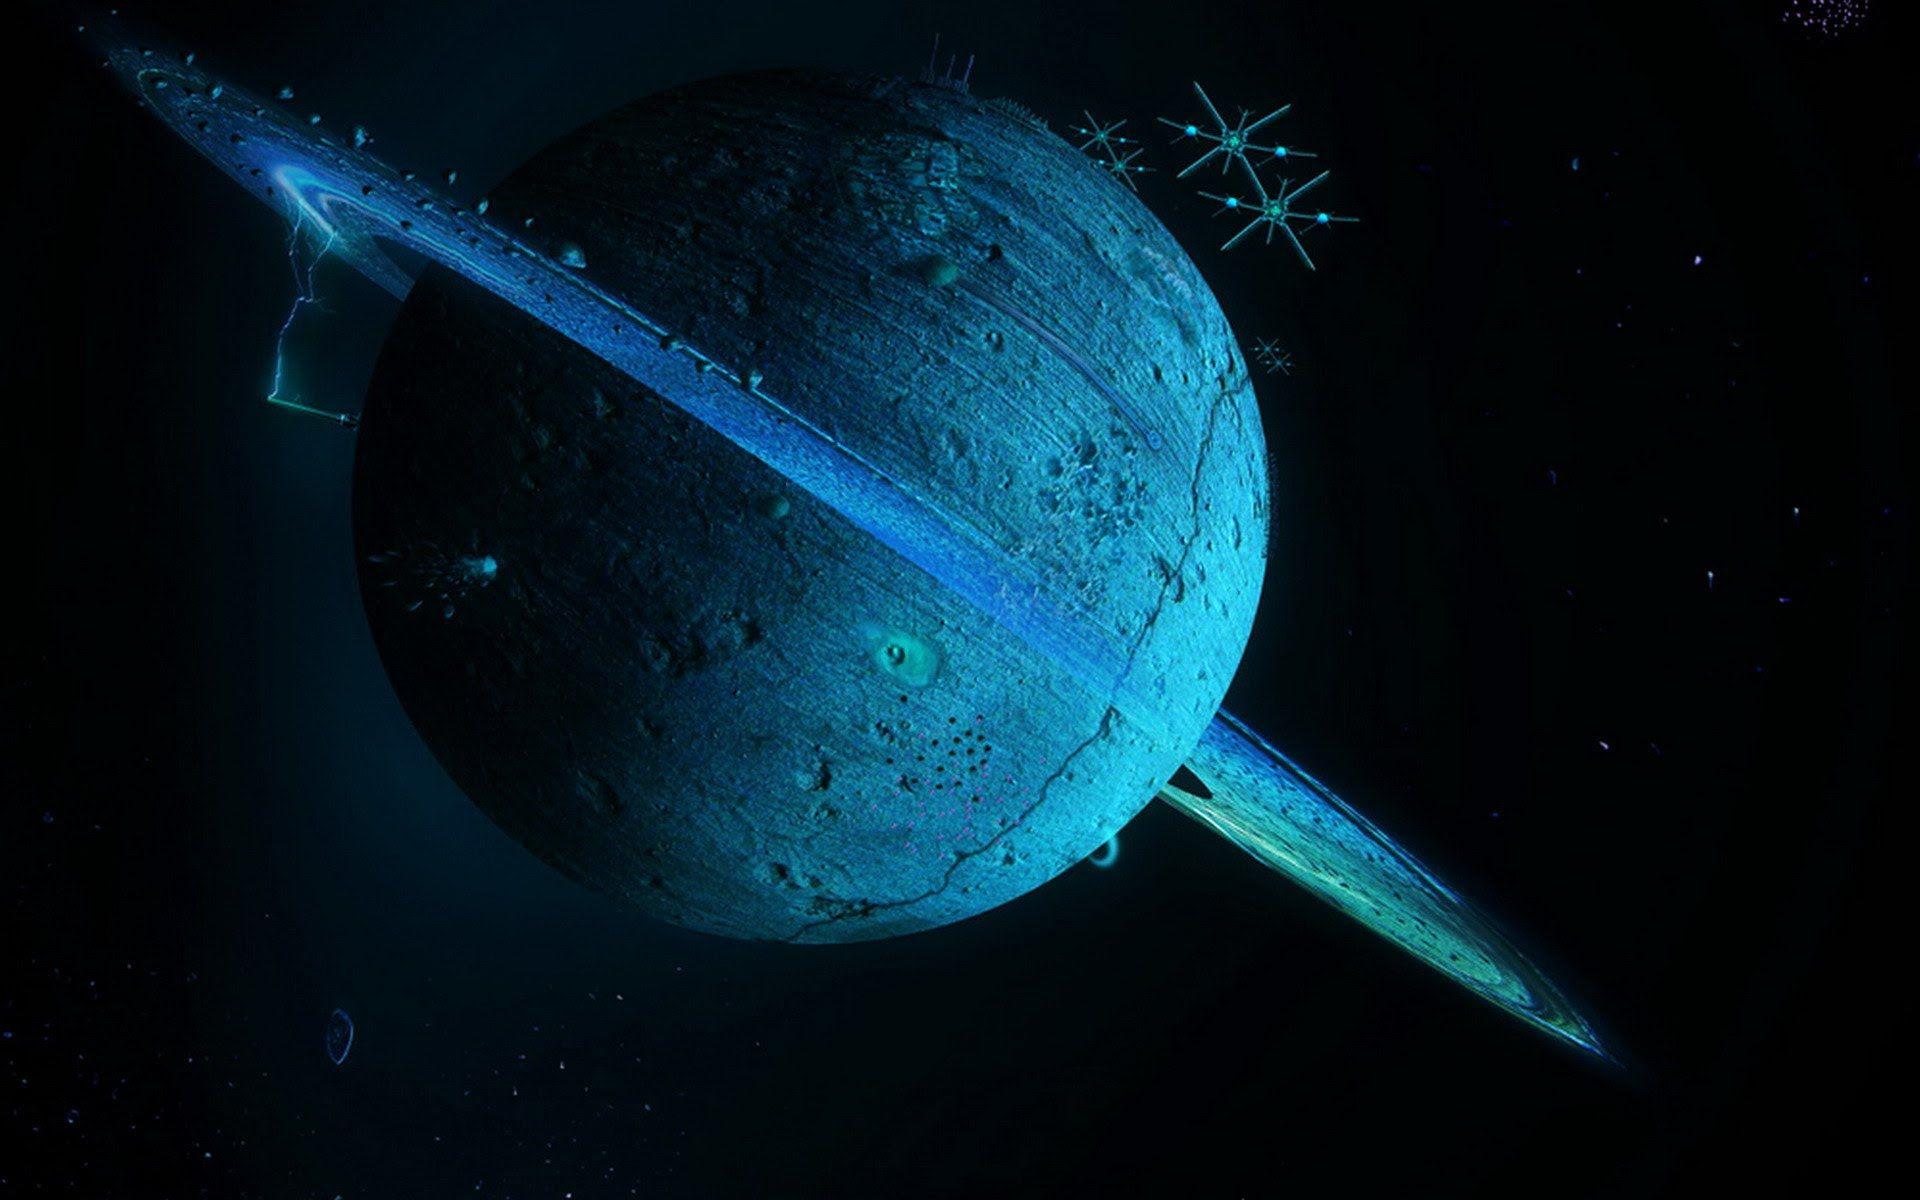 Seventh blue planet Uranus wallpapers and image